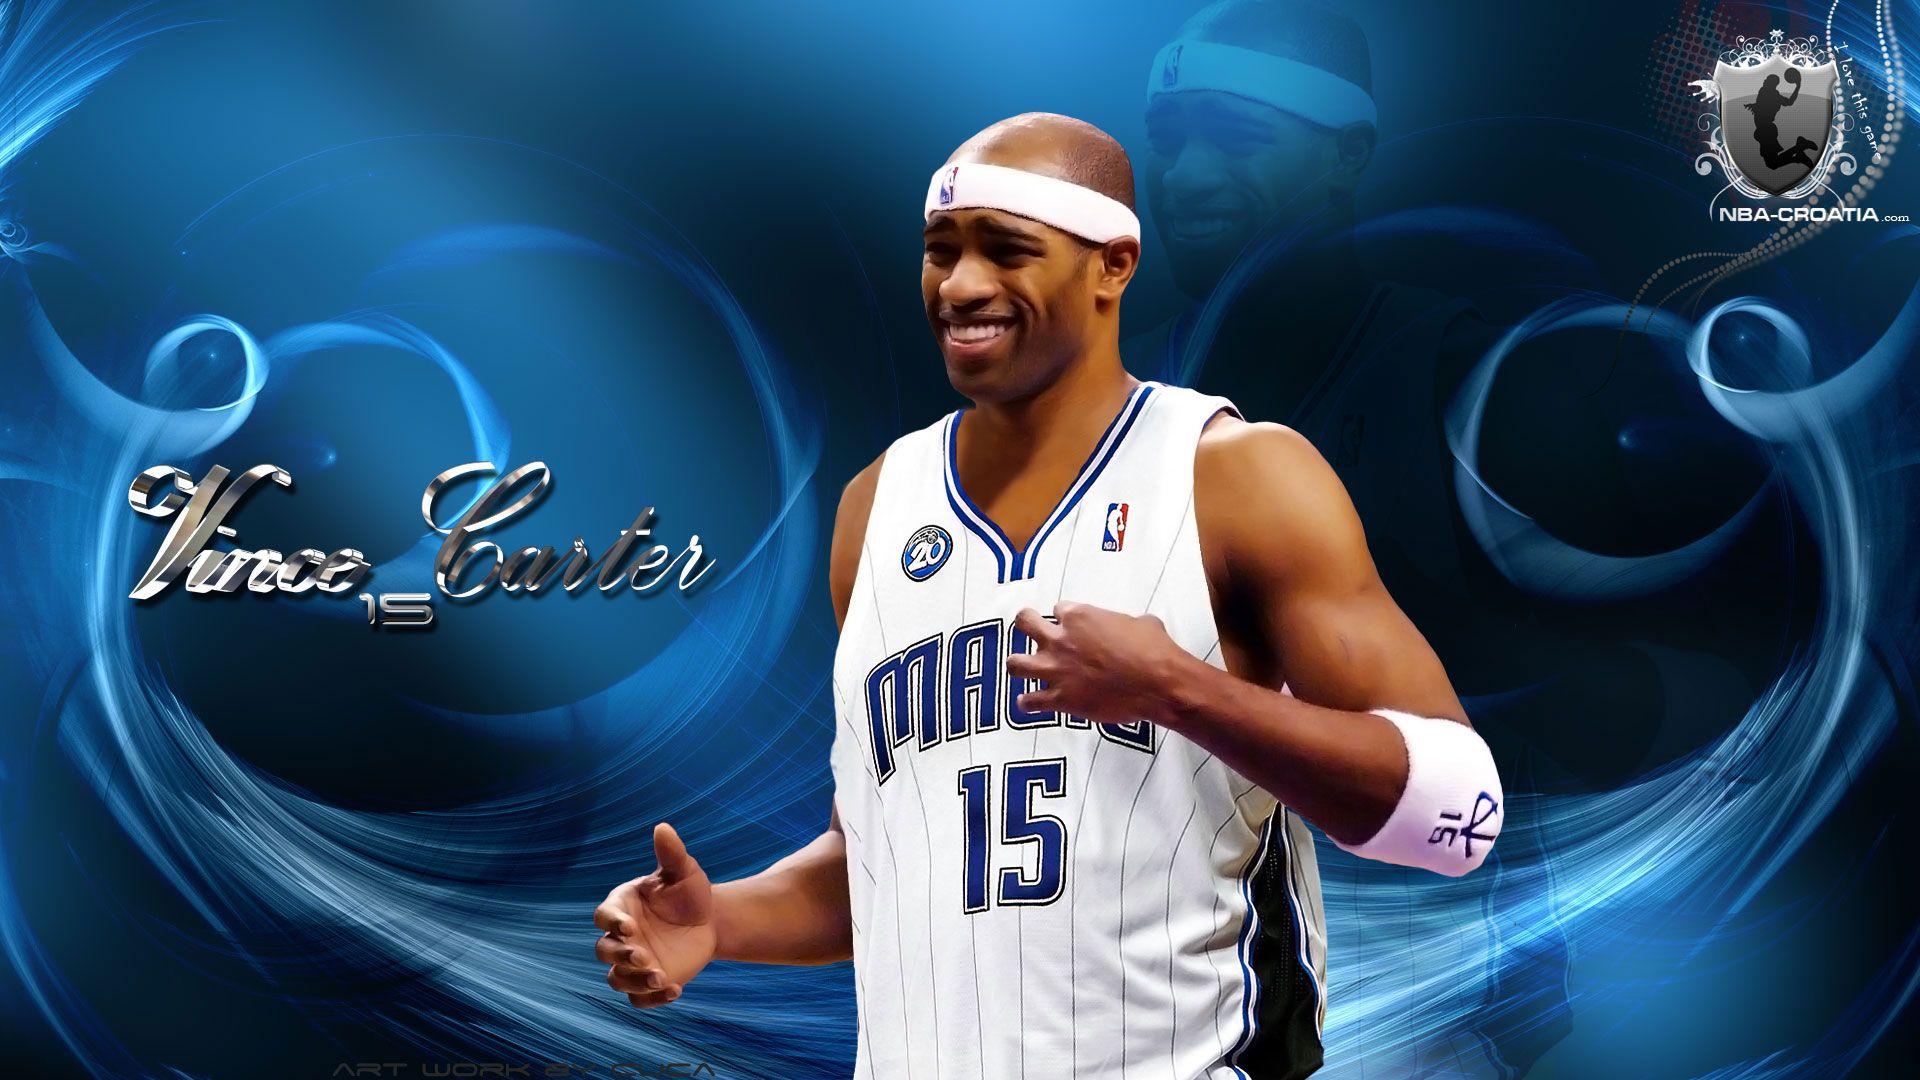 Vince Carter Wallpapers - KoLPaPer - Awesome Free HD Wallpapers